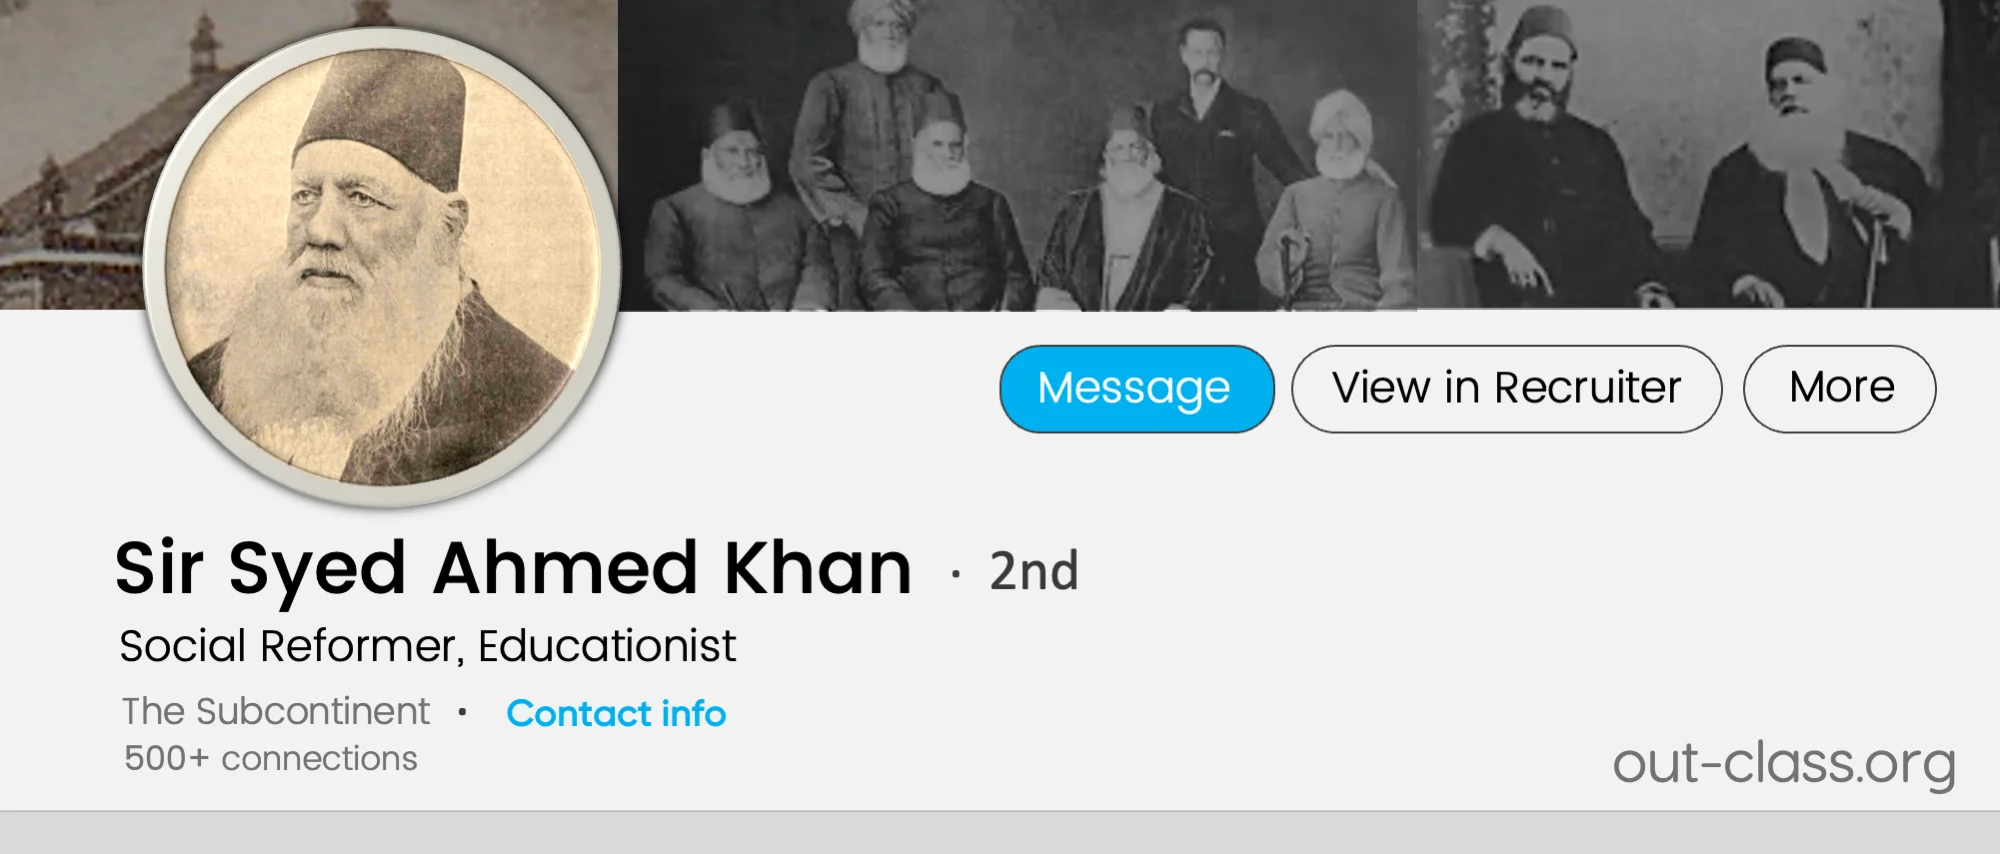 Sir Syed Ahmed Khan, who worked for muslims education through aligarh movement and brought that two nation theory into concept in the subcontinent days.